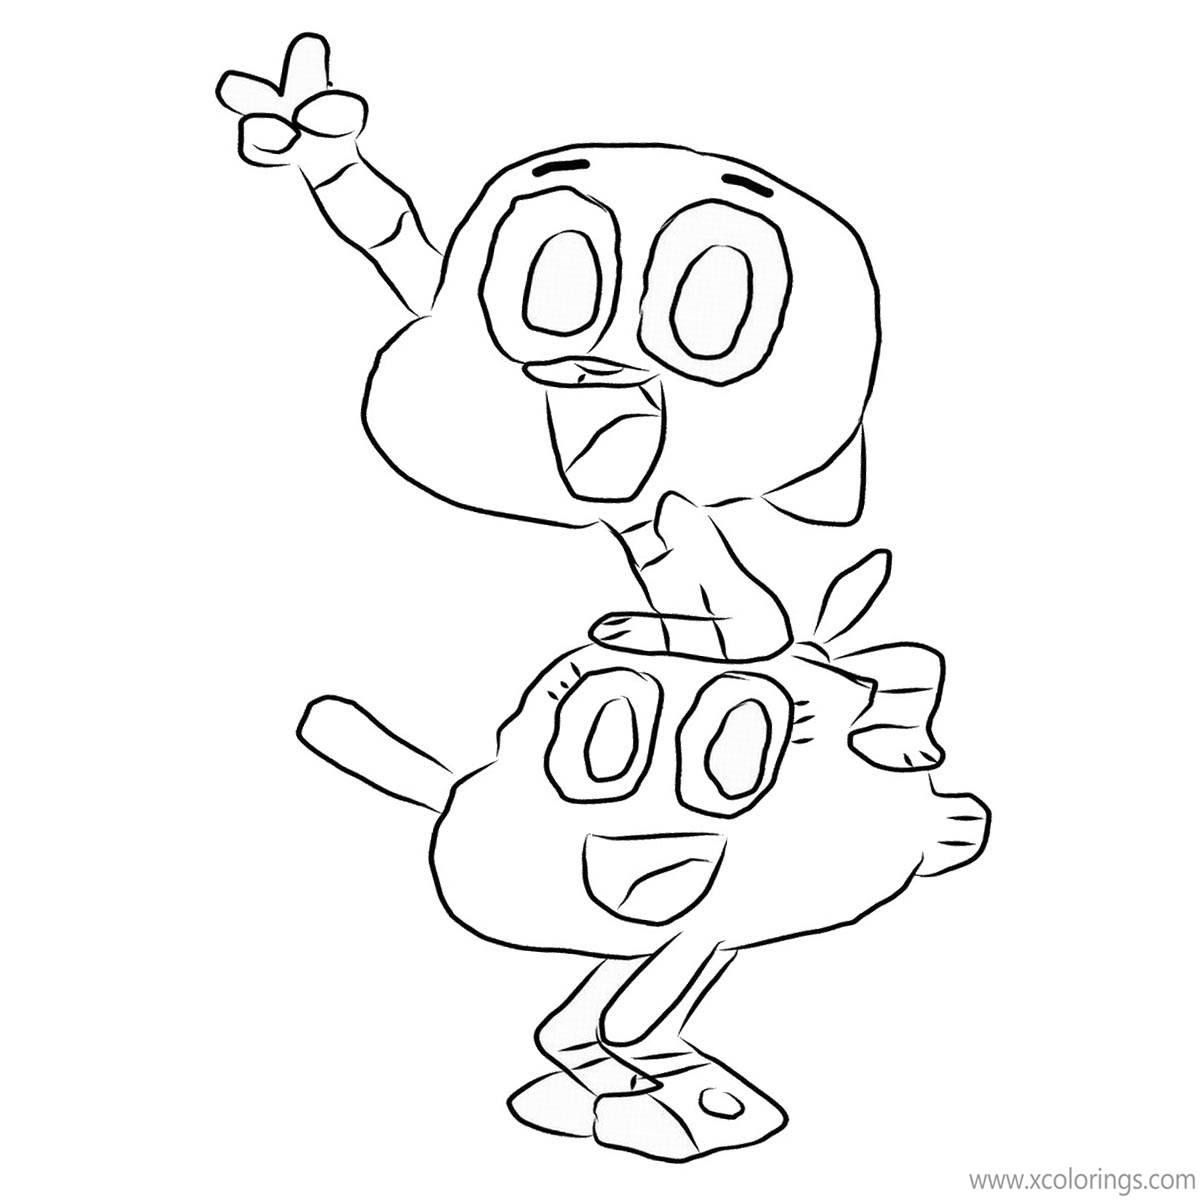 Free The Amazing World of Gumball Coloring Pages Hand Drawing printable